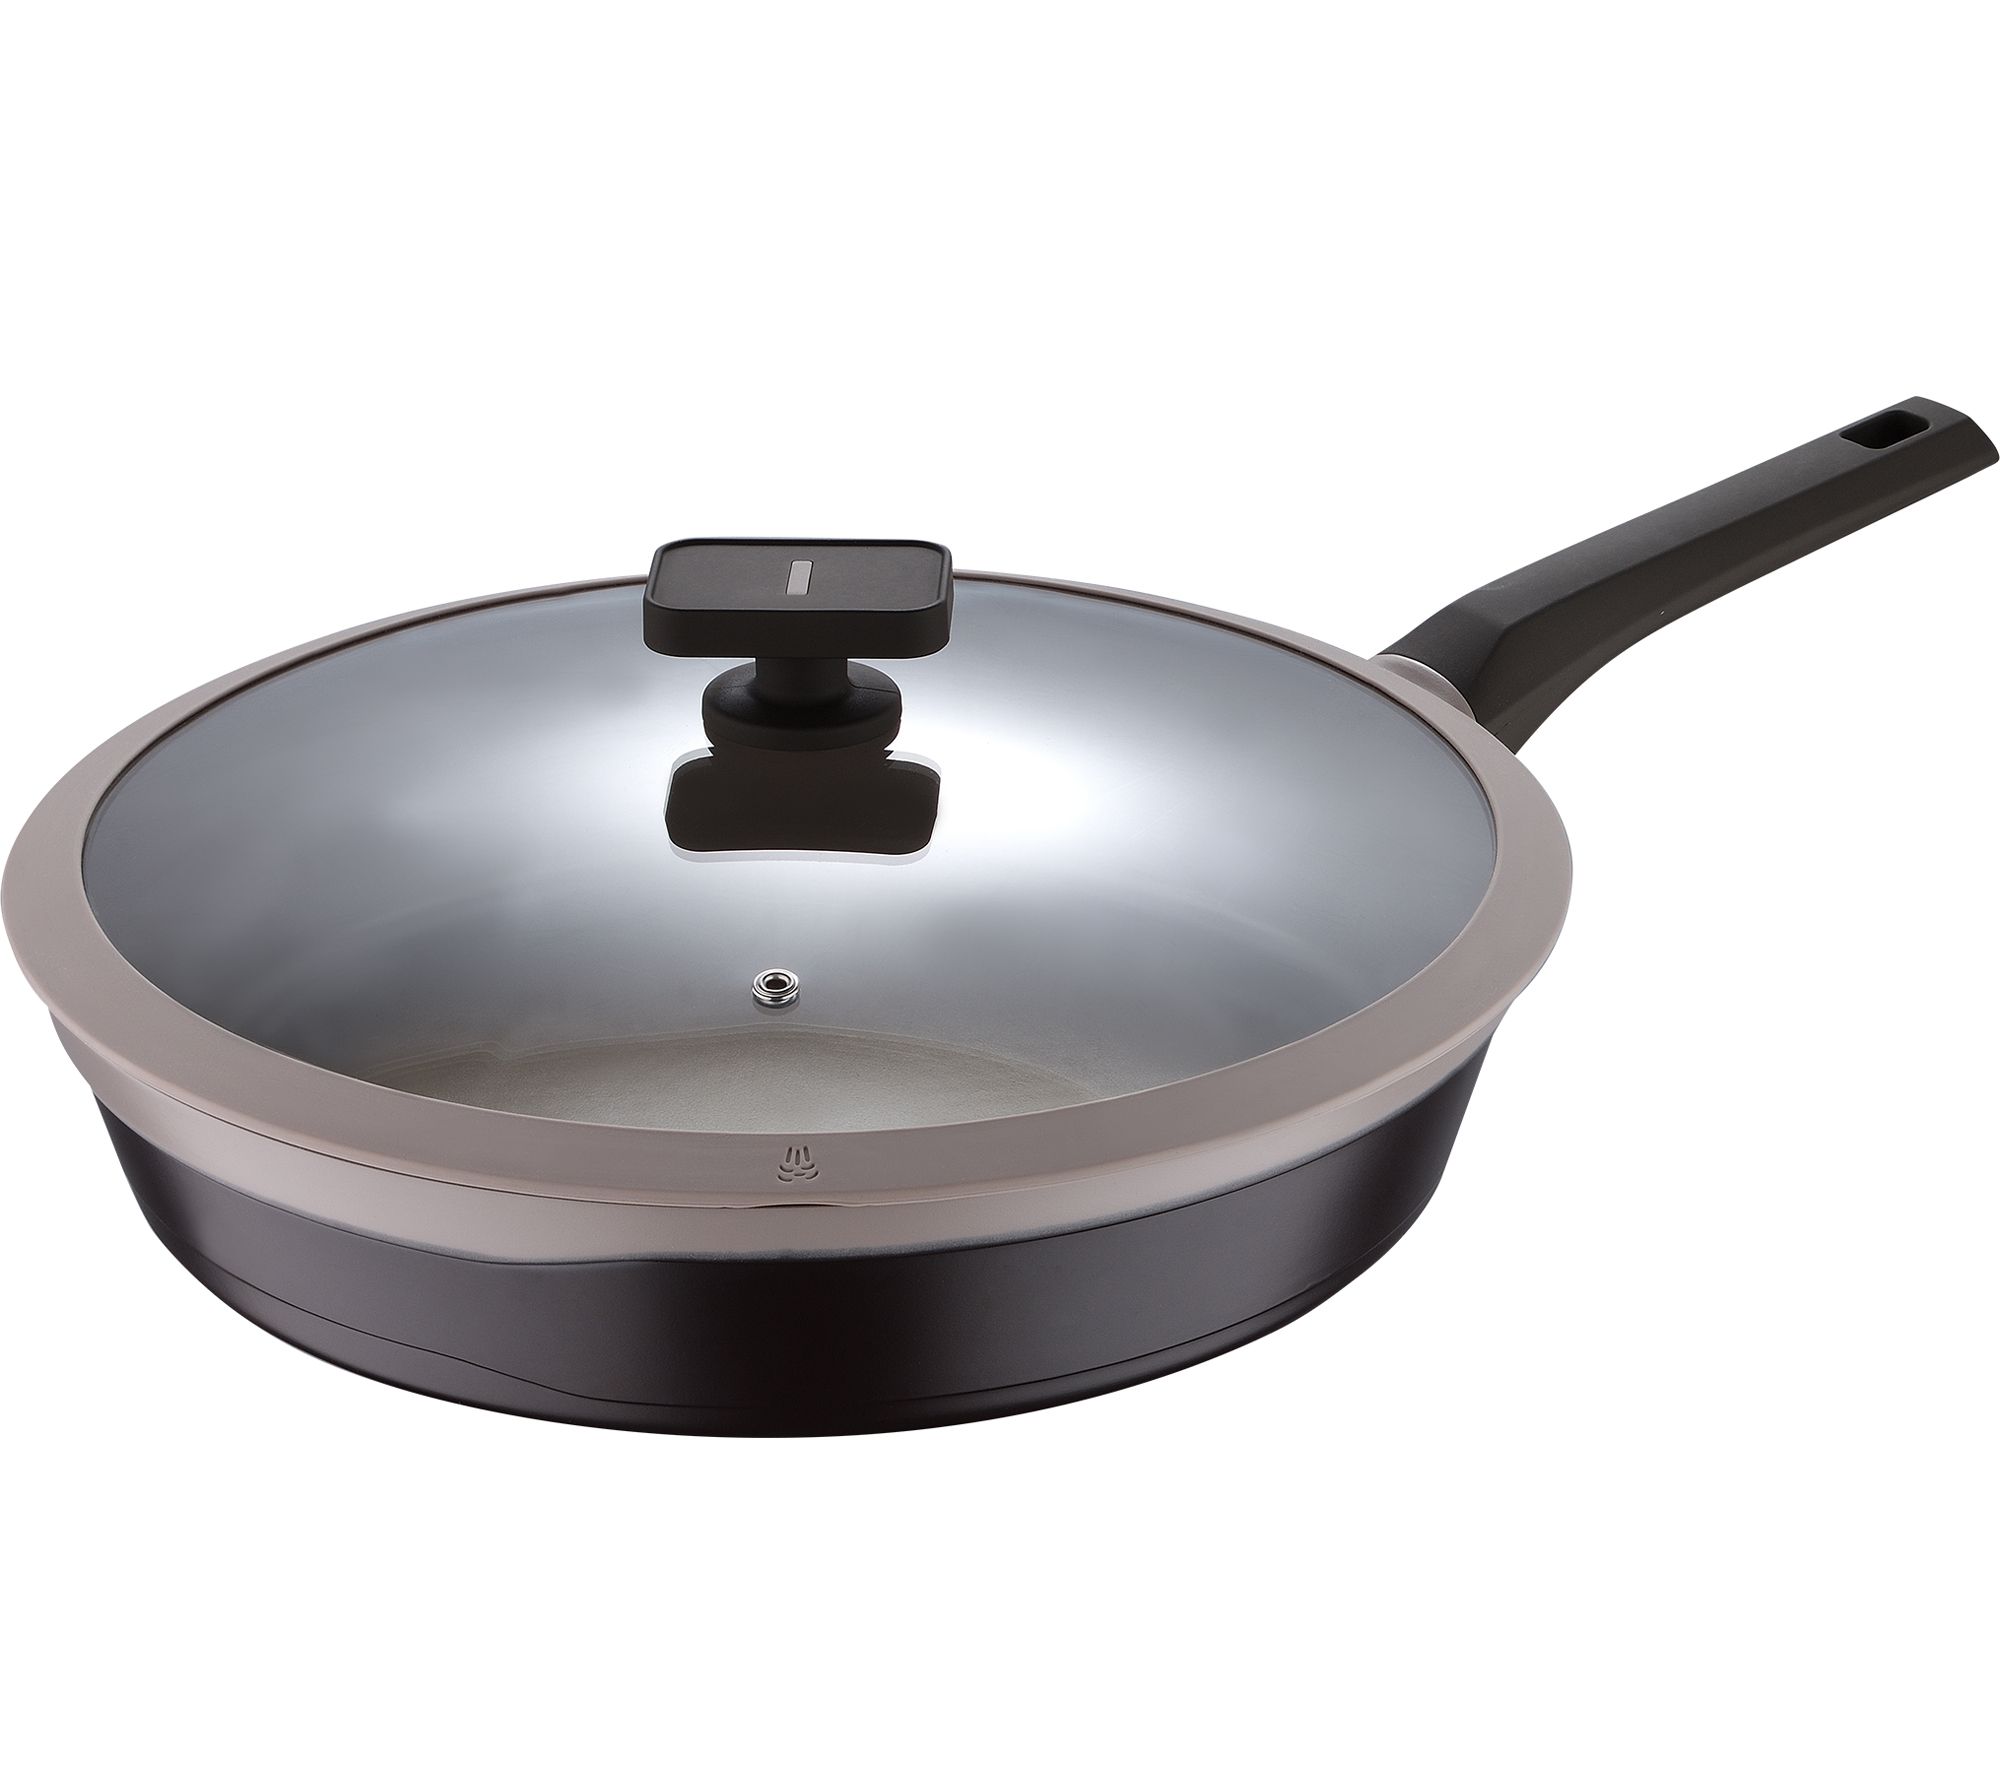 Swiss Diamond XD 12.5 Nonstick Fry Pan with Glass Lid - Induction